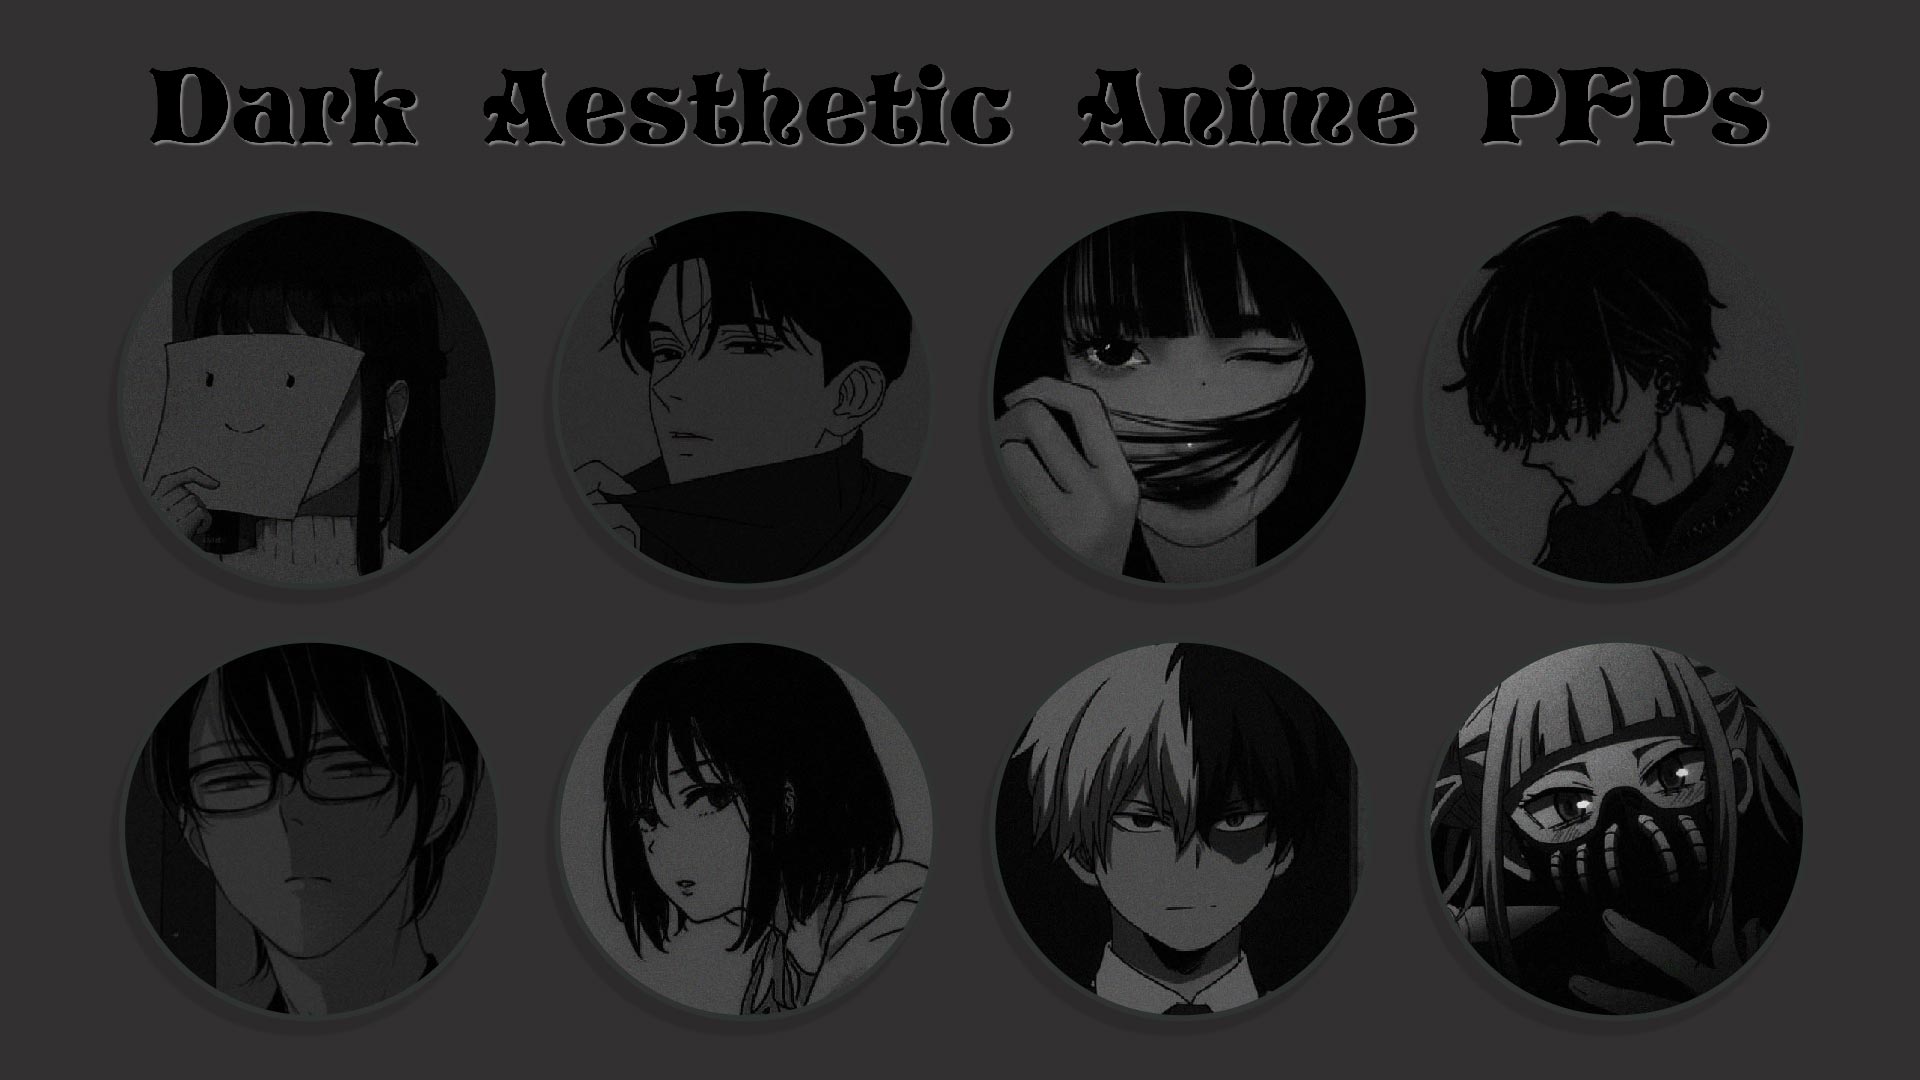 Dark anime characters with different facial expressions - Dark anime, black anime